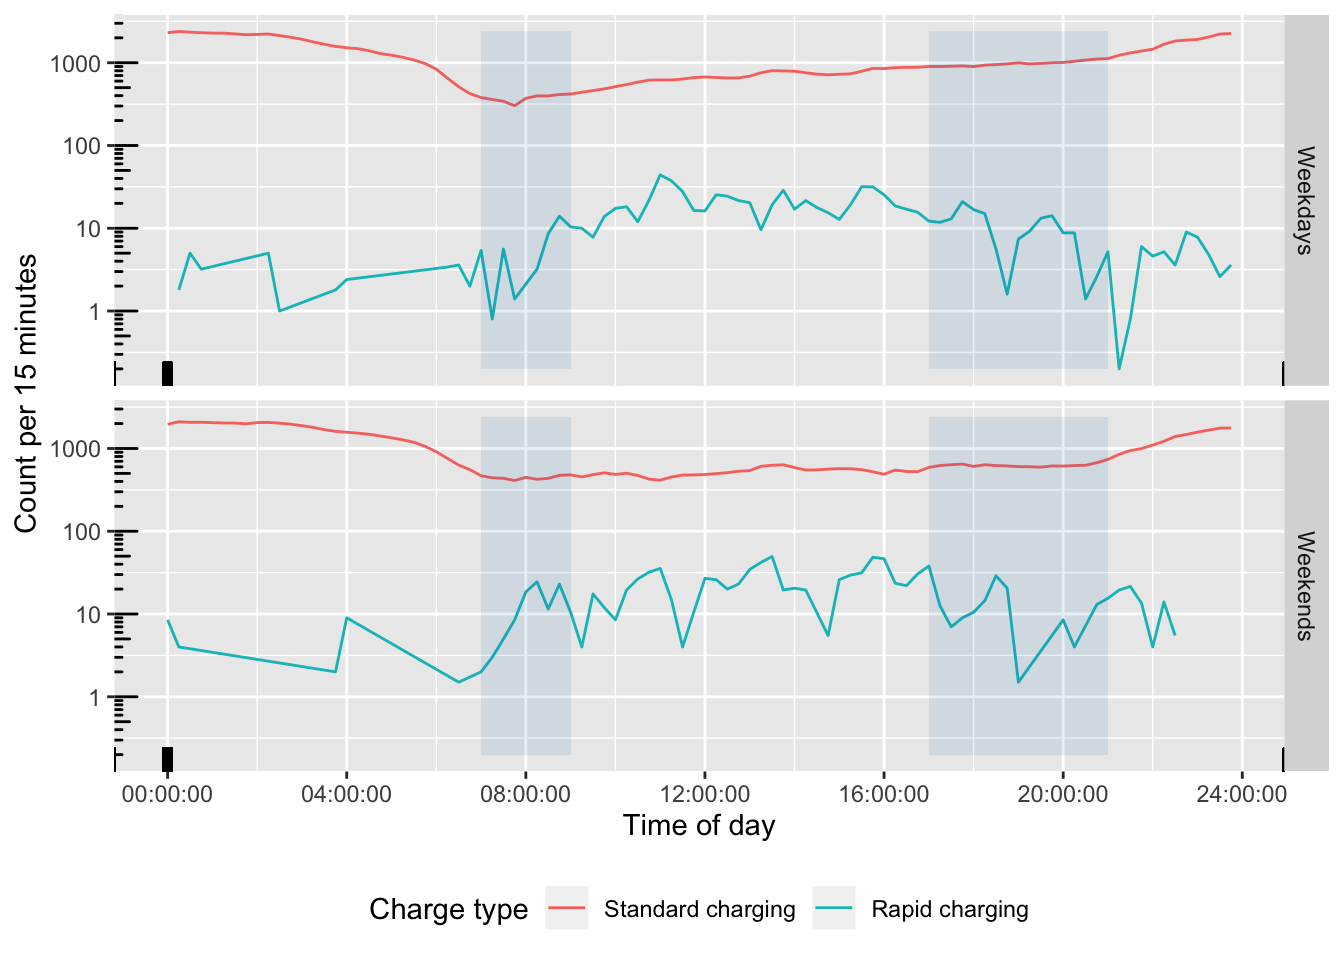 log(Frequency) plot of charging start times during weekdays